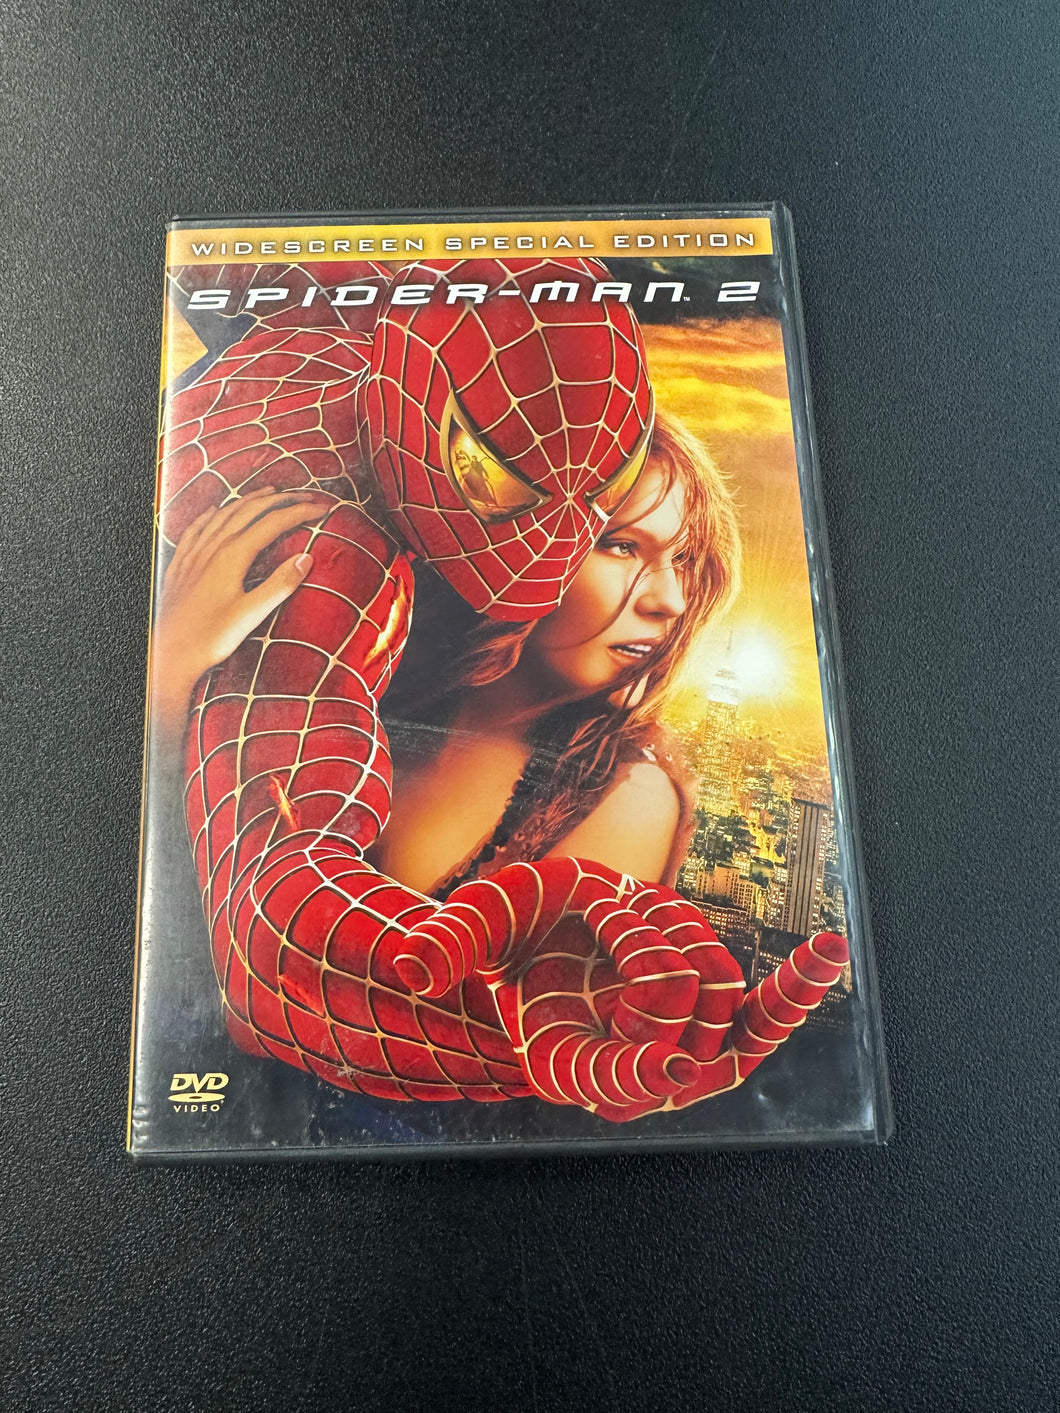 Spider-Man 2 Widescreen Special Edition [DVD] Preowned